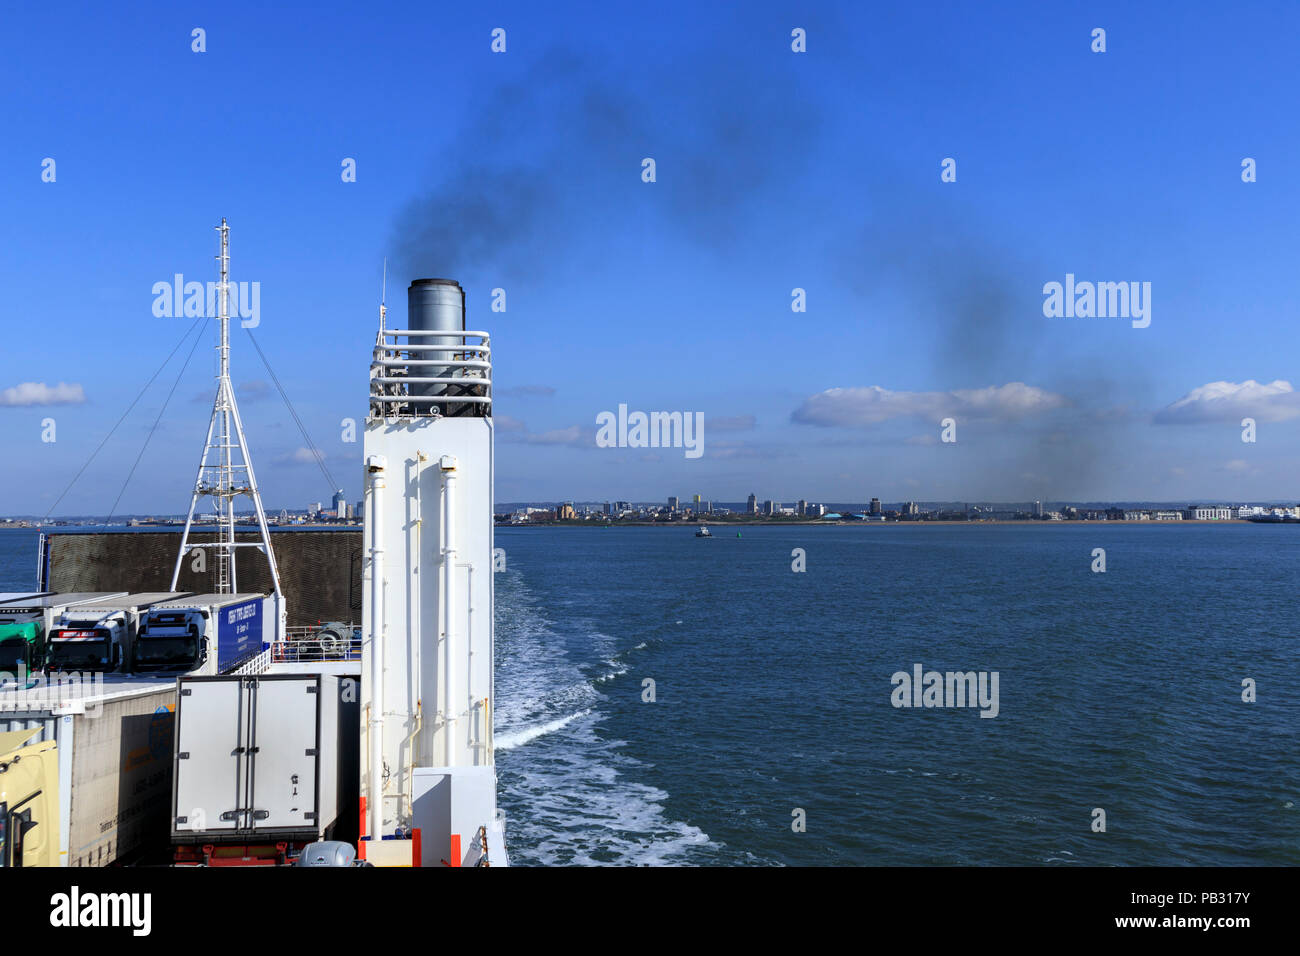 Black smoke trailing from a ferry funnel polluting the atmosphere against a blue sky Stock Photo